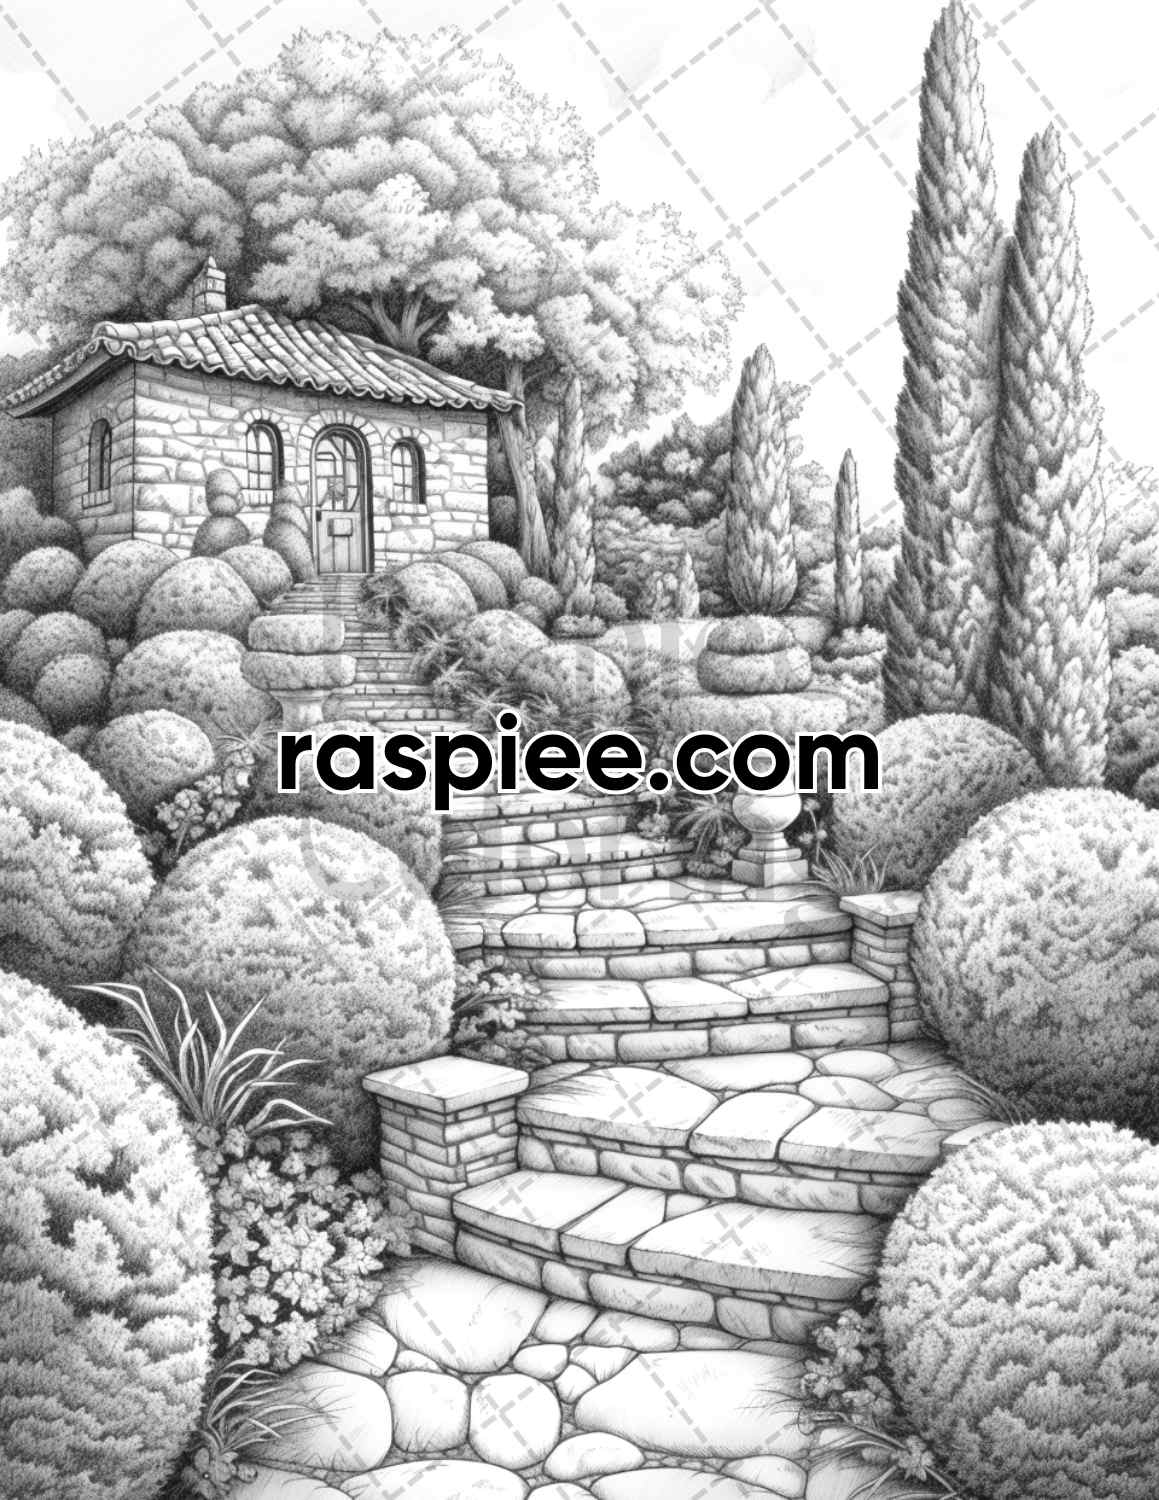 adult coloring pages, adult coloring sheets, adult coloring book pdf, adult coloring book printable, grayscale coloring pages, grayscale coloring books, cottage garden coloring pages for adults, cottage garden coloring book, grayscale illustration, spring adult coloring pages, flower coloring pages, summer coloring pages, autumn coloring pages